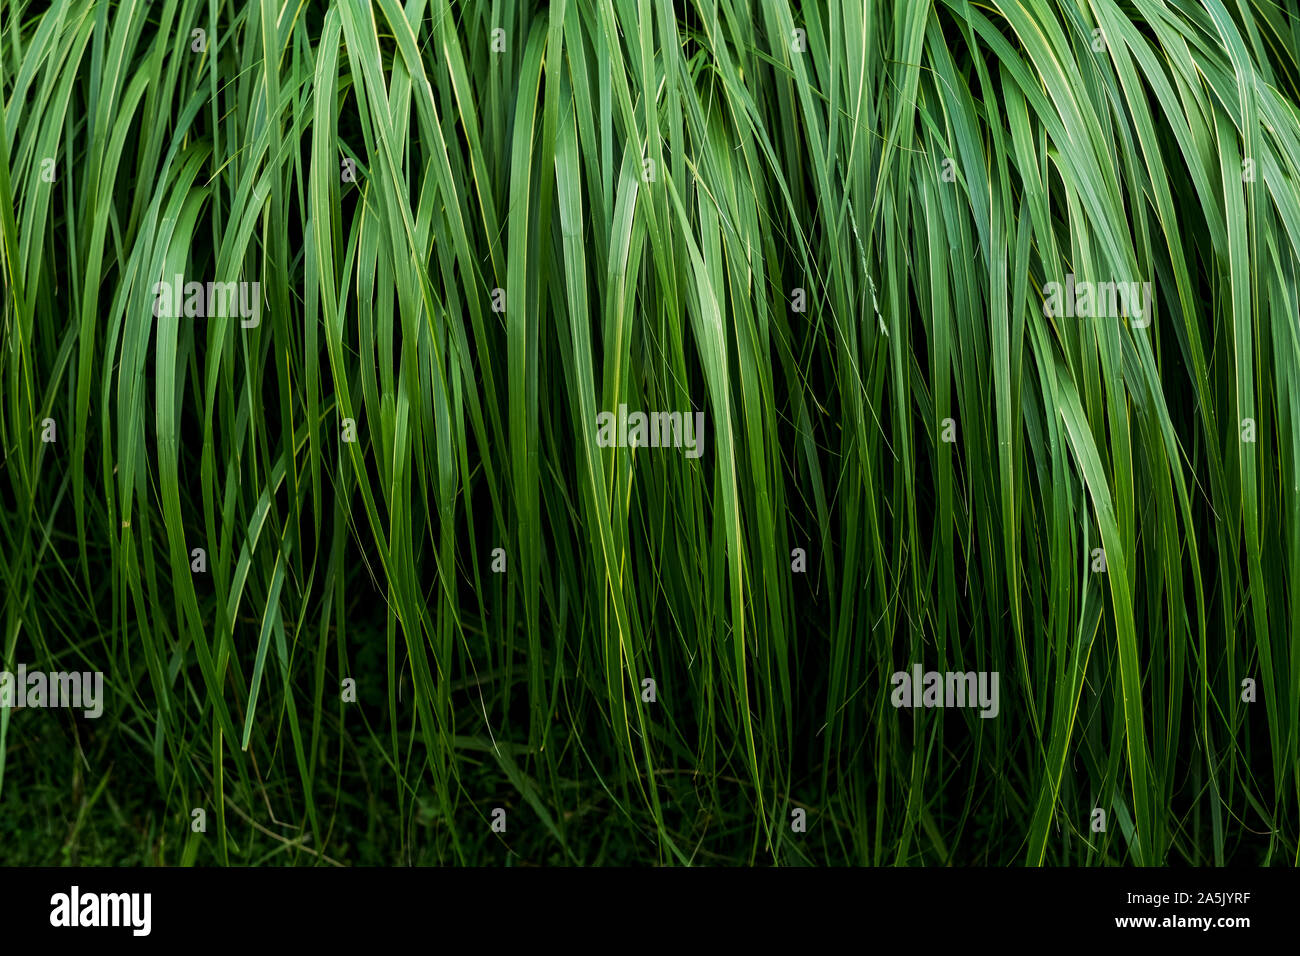 Close up of lush Green grass blades. Banque D'Images